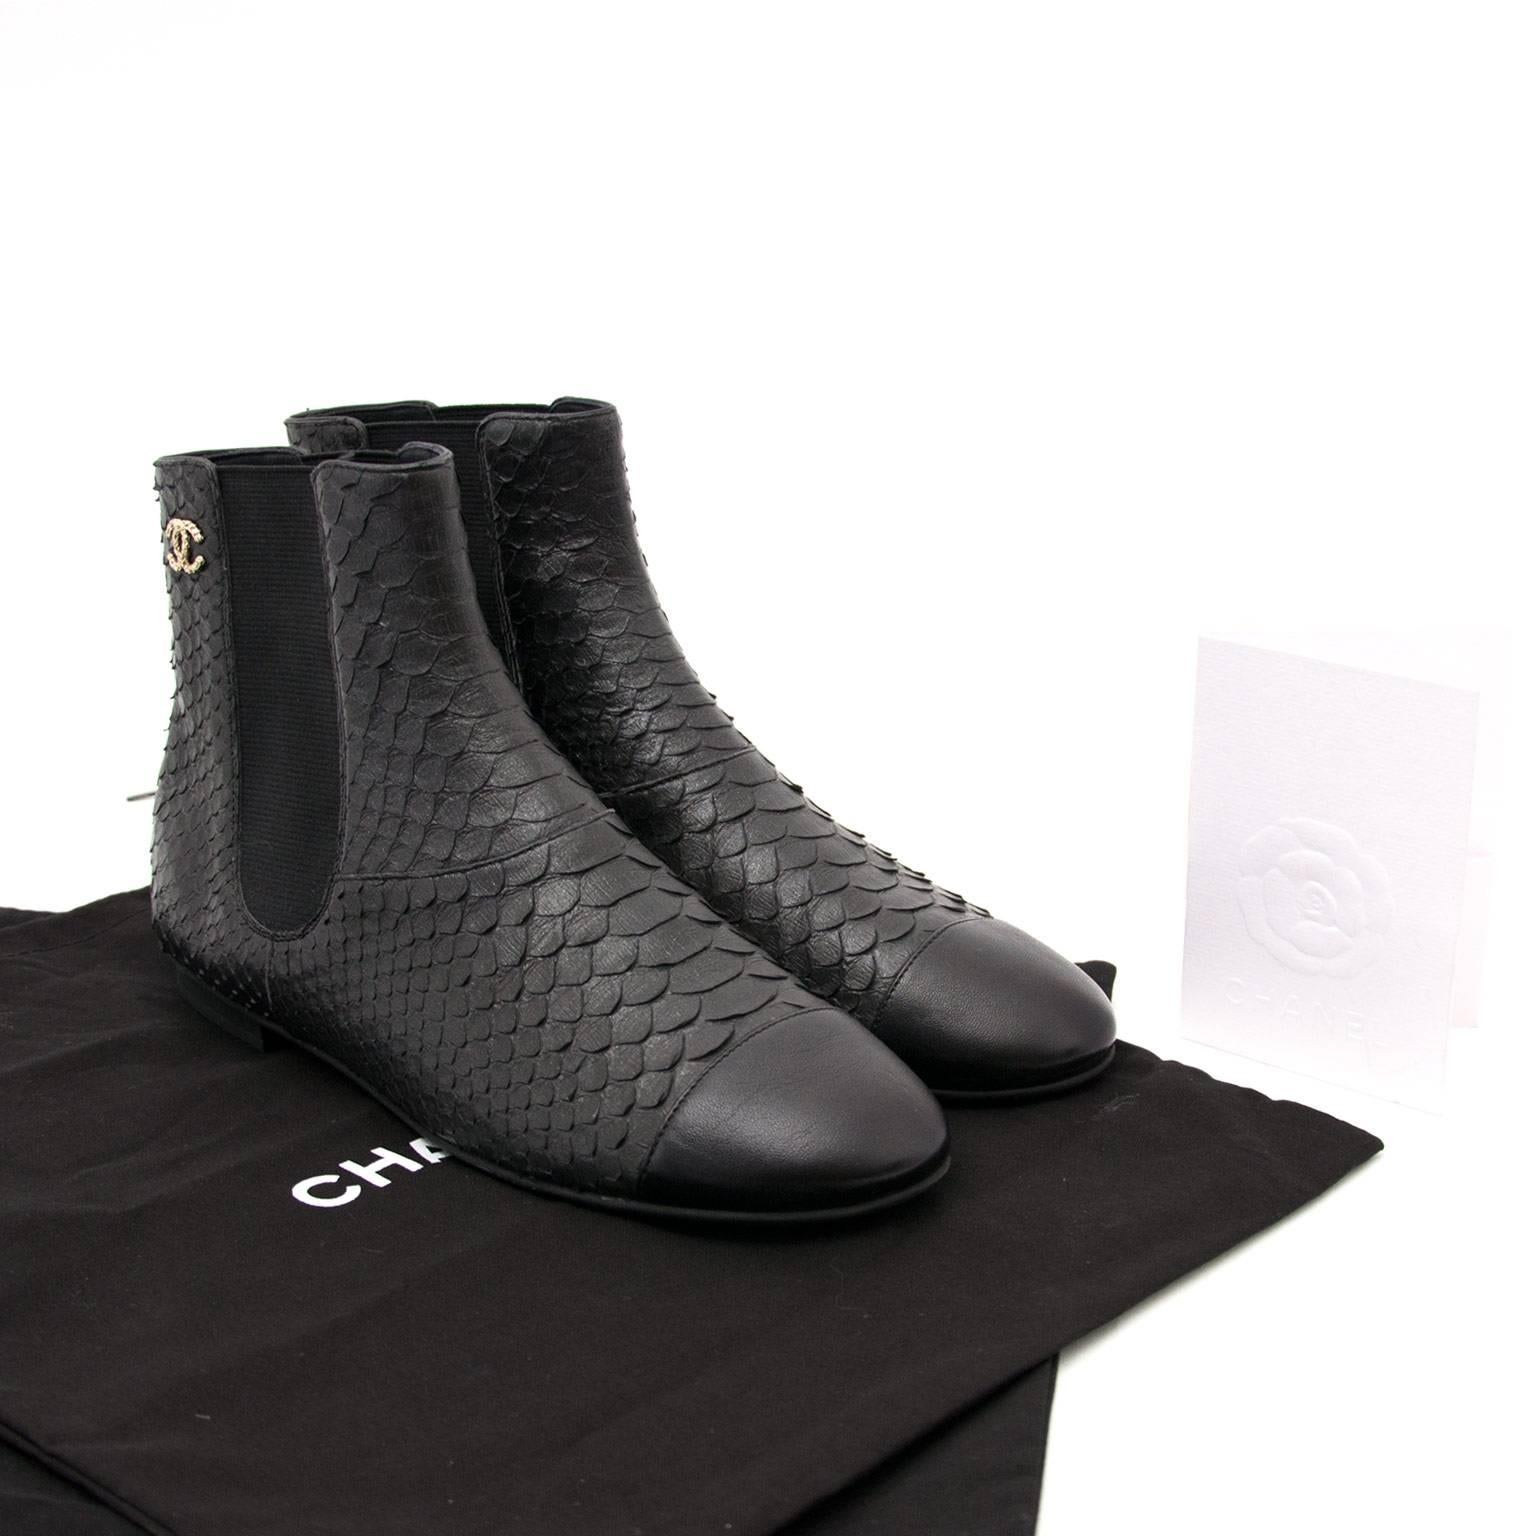 Chanel Python Ankle Boots

These beautiful Chanel ankle boots feature elastic at the shaft, making these easy to put on and to walk around on all day. The python leather is the epitome of luxury, and the CC logo on top of the boot is subtile yet